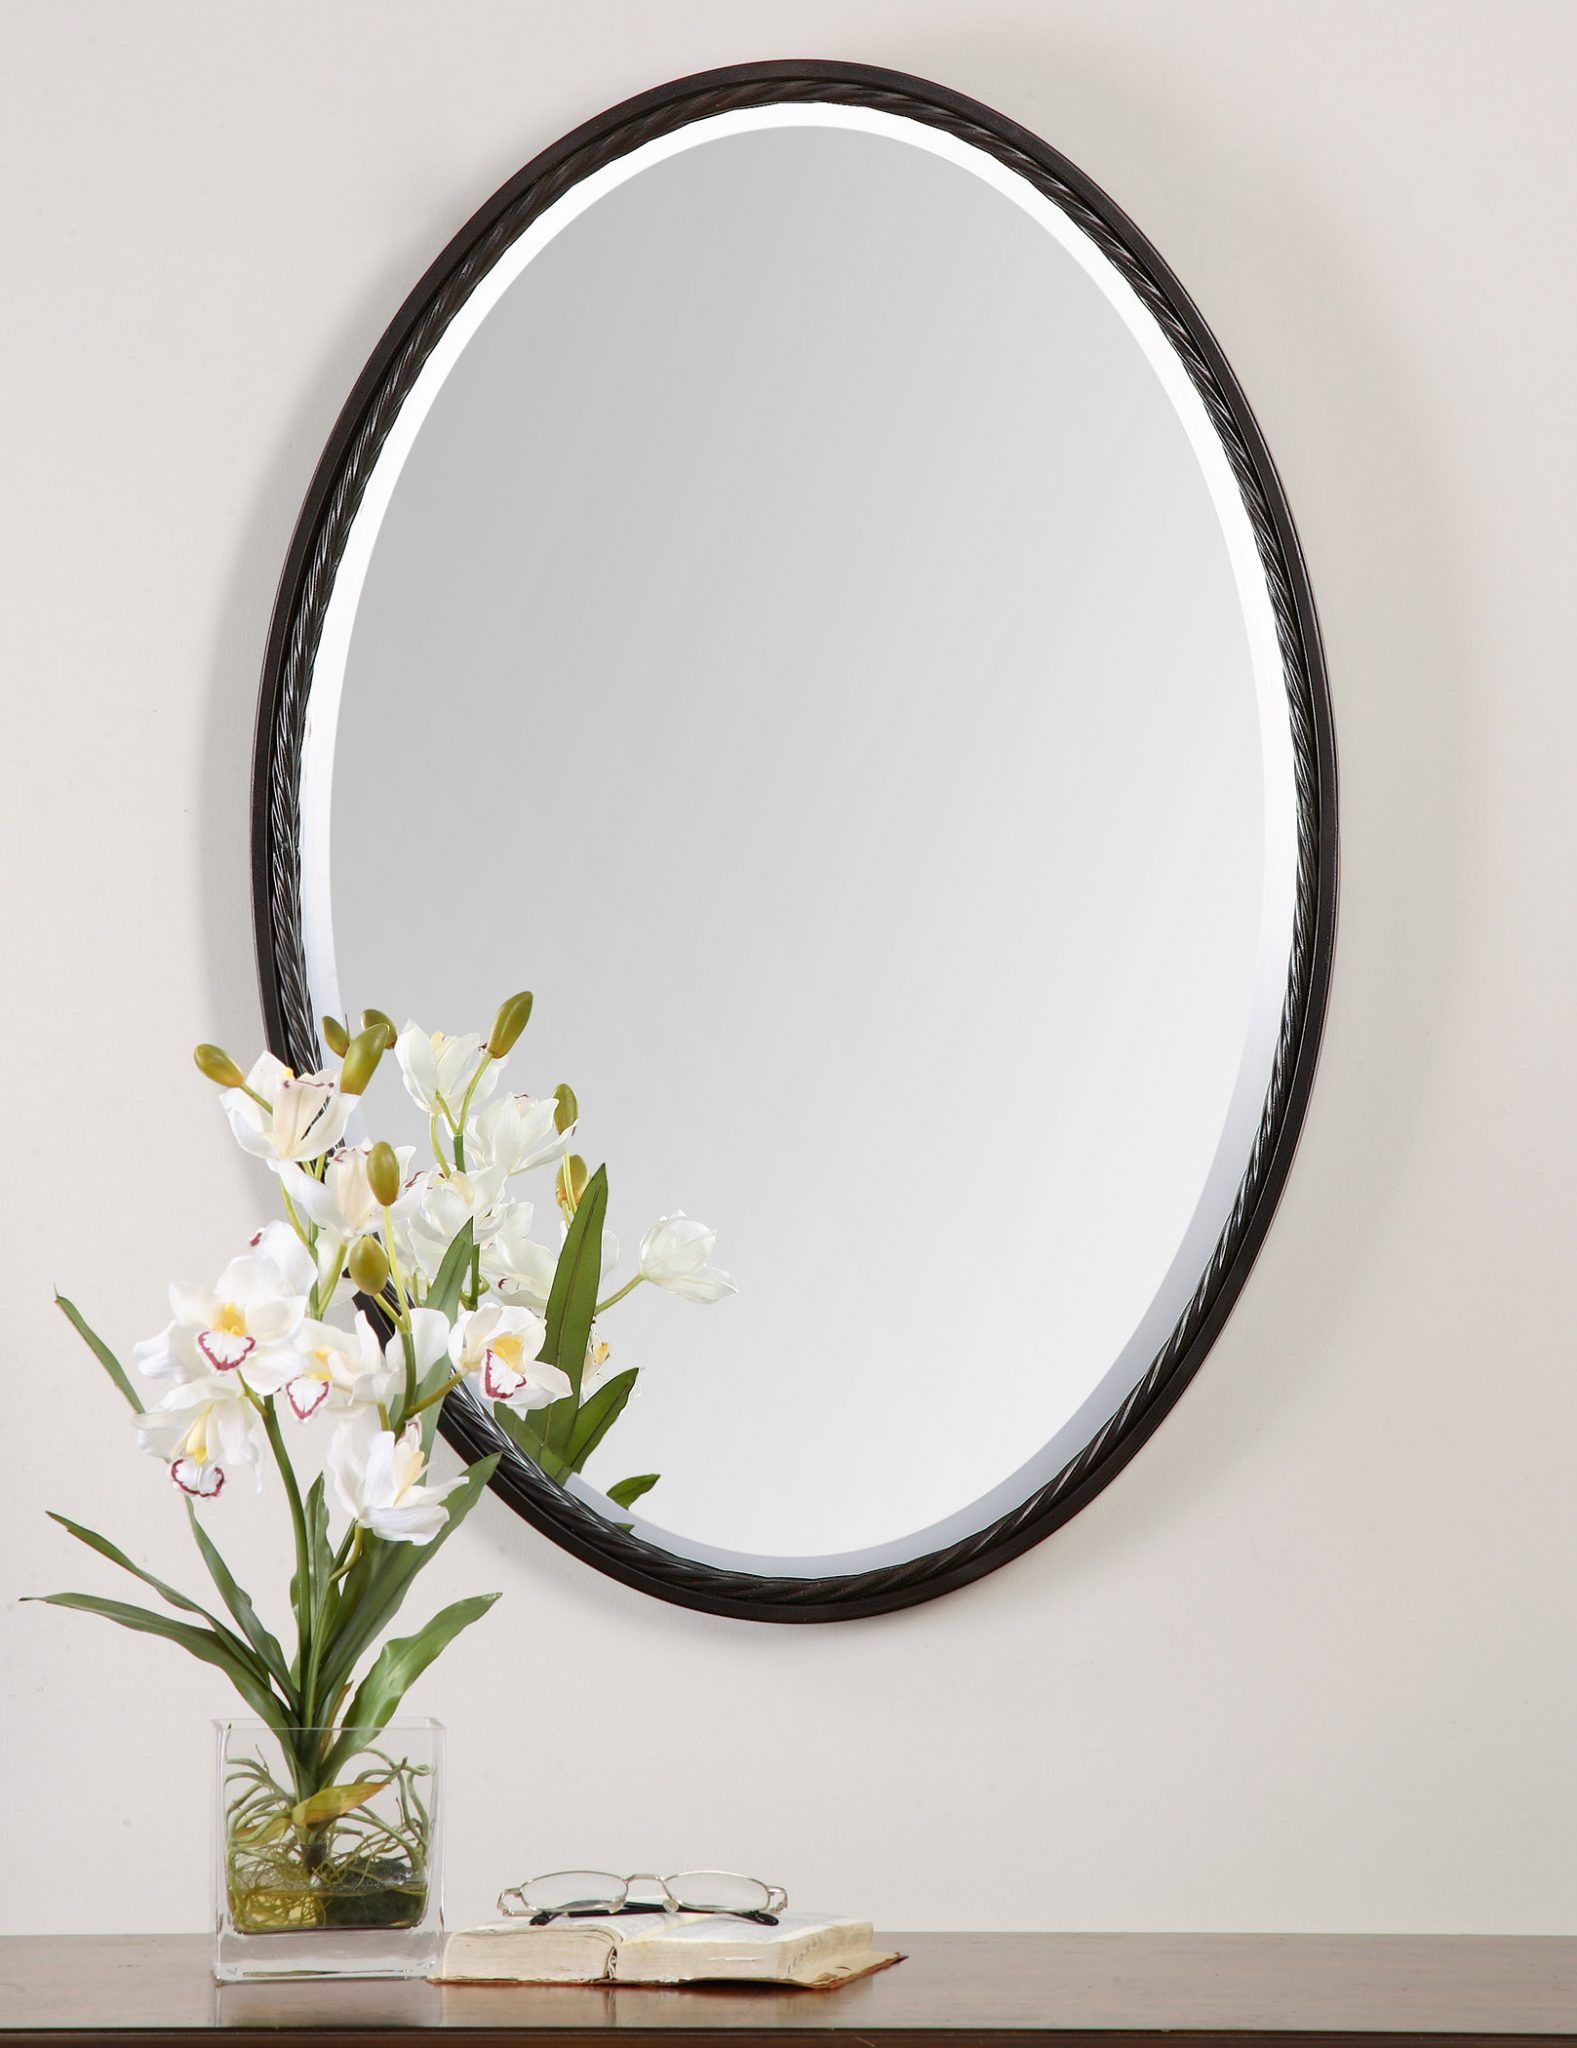 Uttermost Casalina Oil Rubbed Bronze Oval Mirror – Sacksteder's Inside Oil Rubbed Bronze Finish Oval Wall Mirrors (Photo 15 of 15)